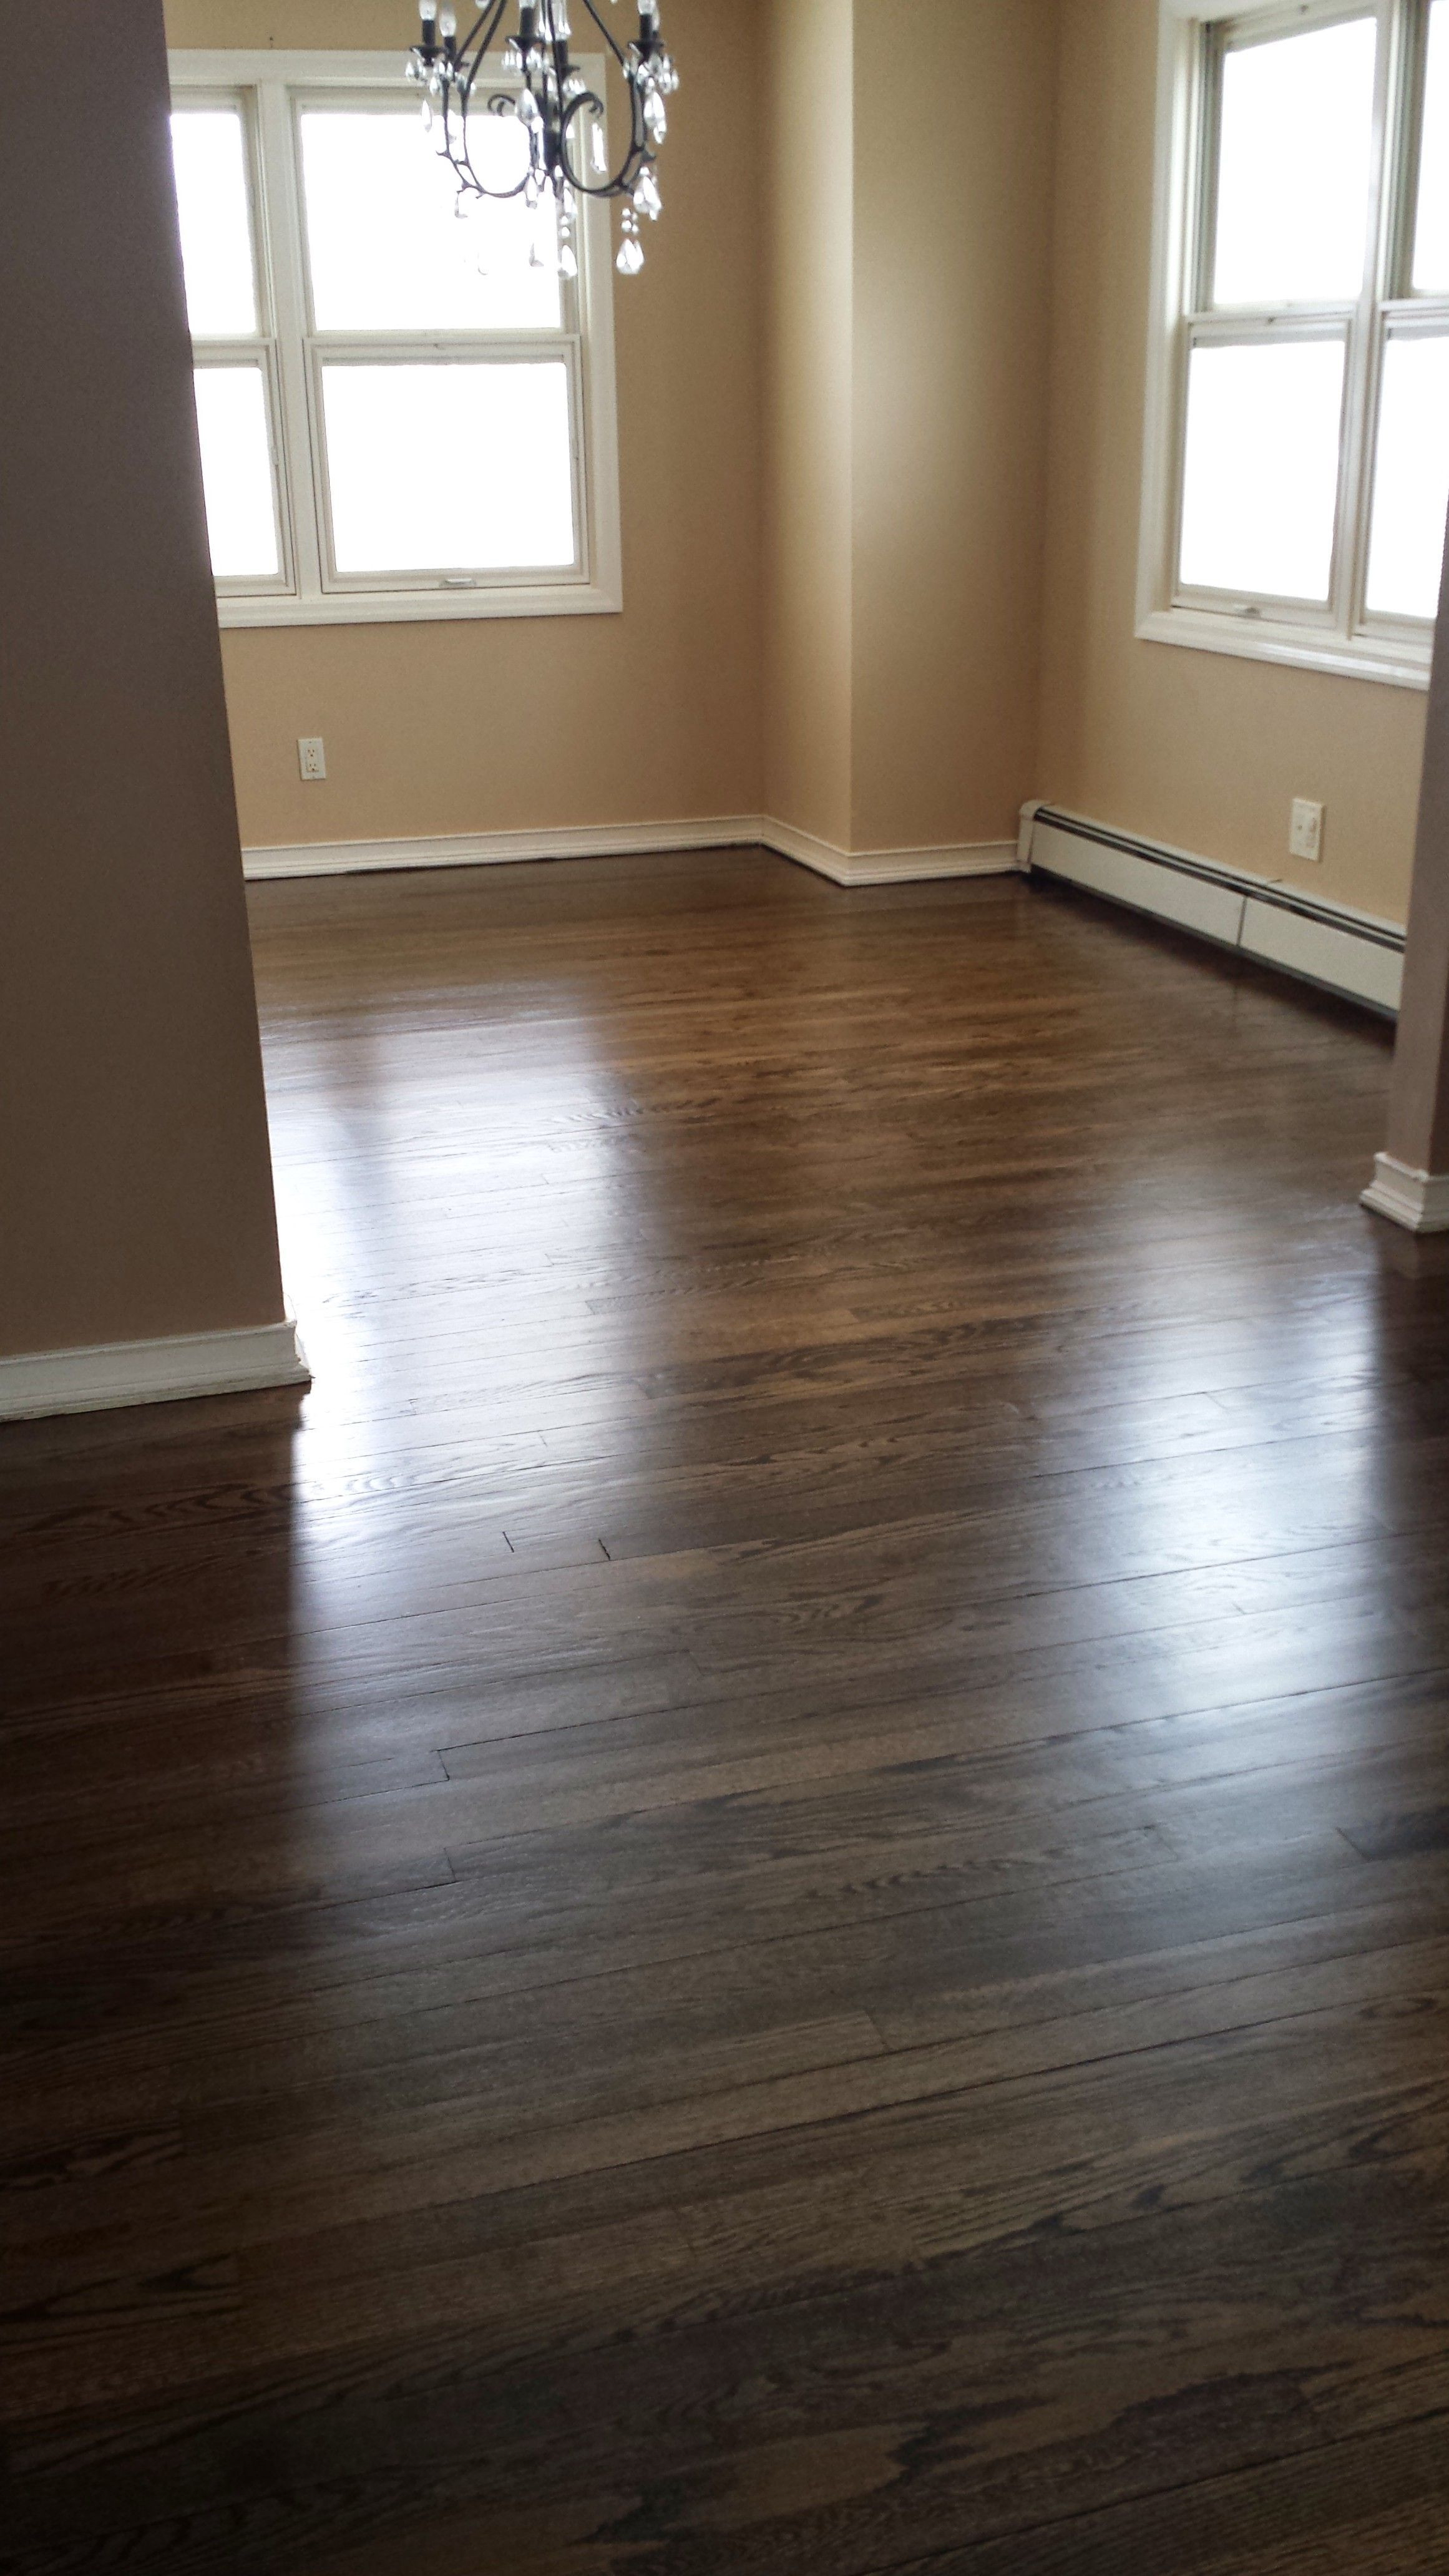 21 attractive How to Estimate Hardwood Floor Installation 2024 free download how to estimate hardwood floor installation of hardwood floor refinishing is an affordable way to spruce up your within hardwood floor refinishing is an affordable way to spruce up your spac